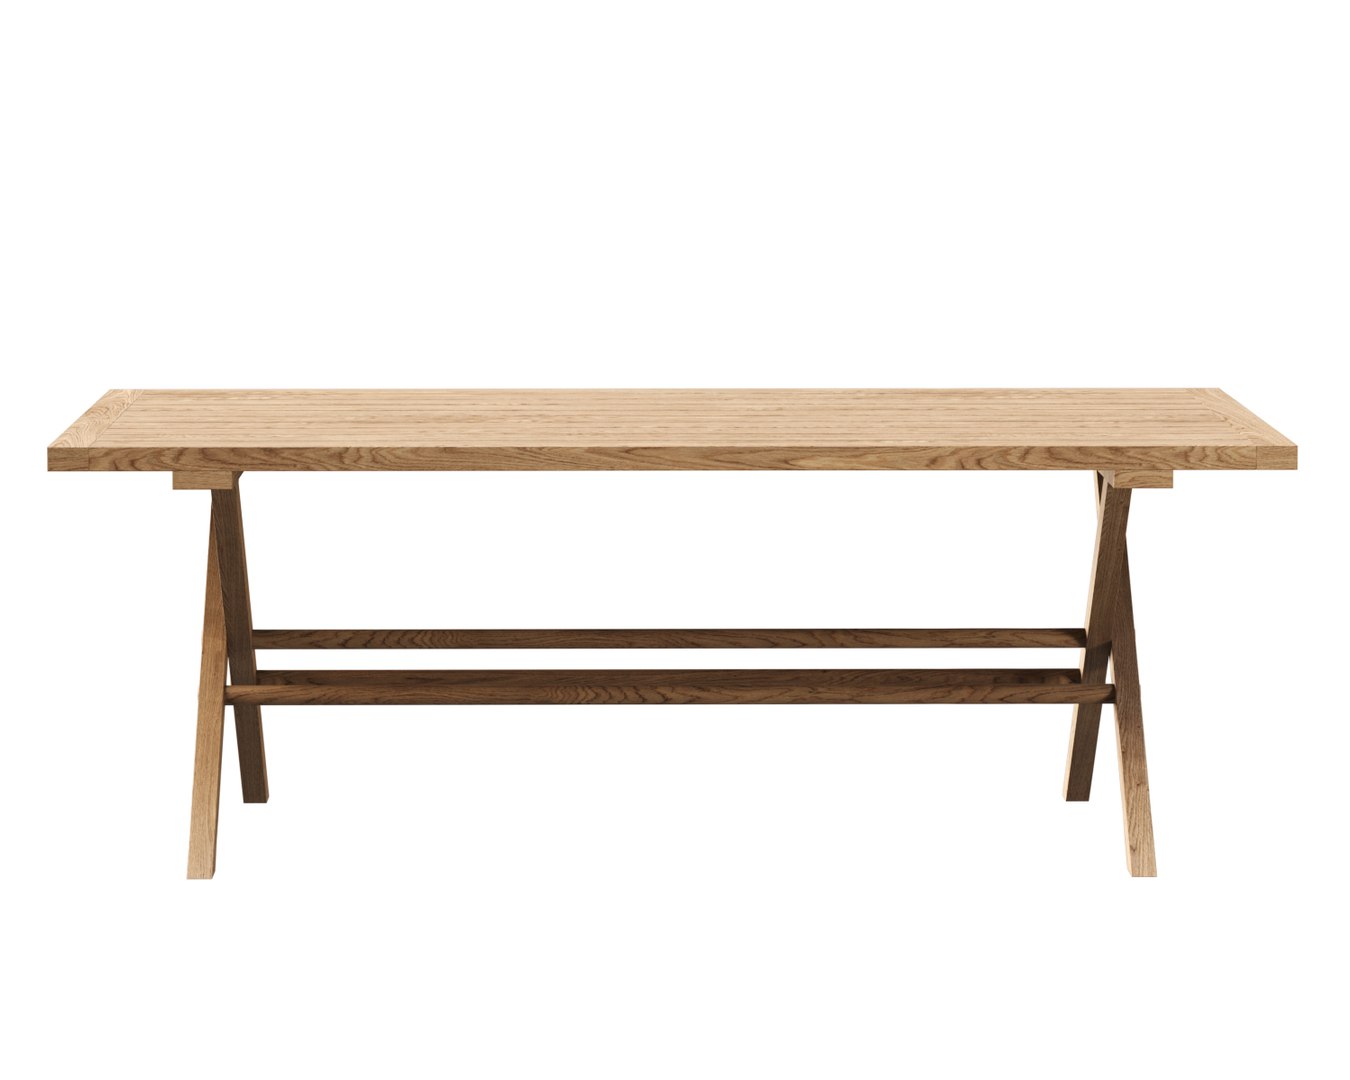 3D model Alesso wooden dining table - TurboSquid 1842756